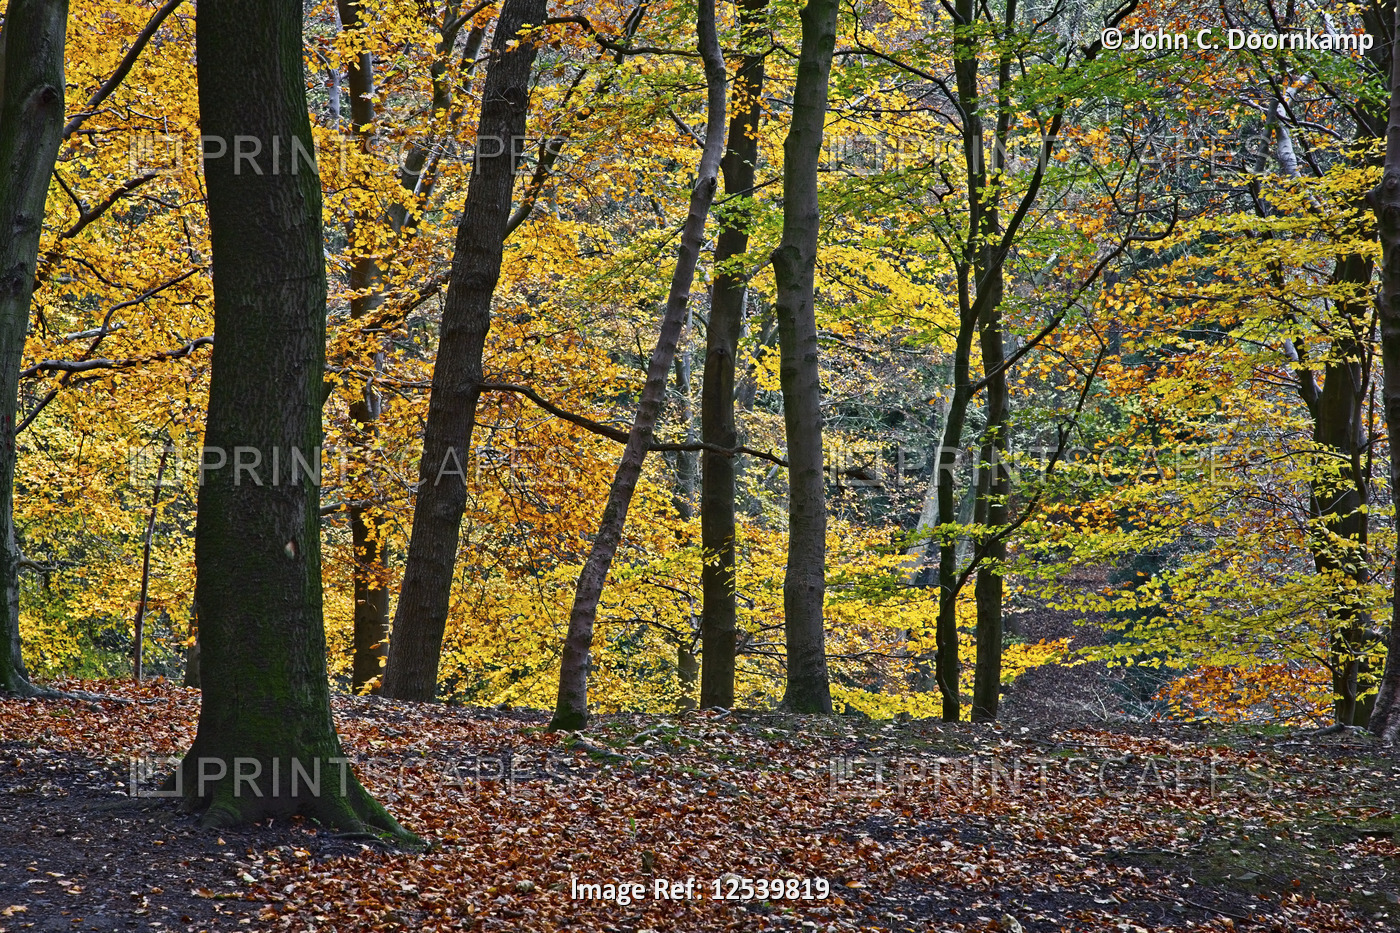 A  BEECH WOODLAND IN ITS COLOURFUL AUTUMN GLORY